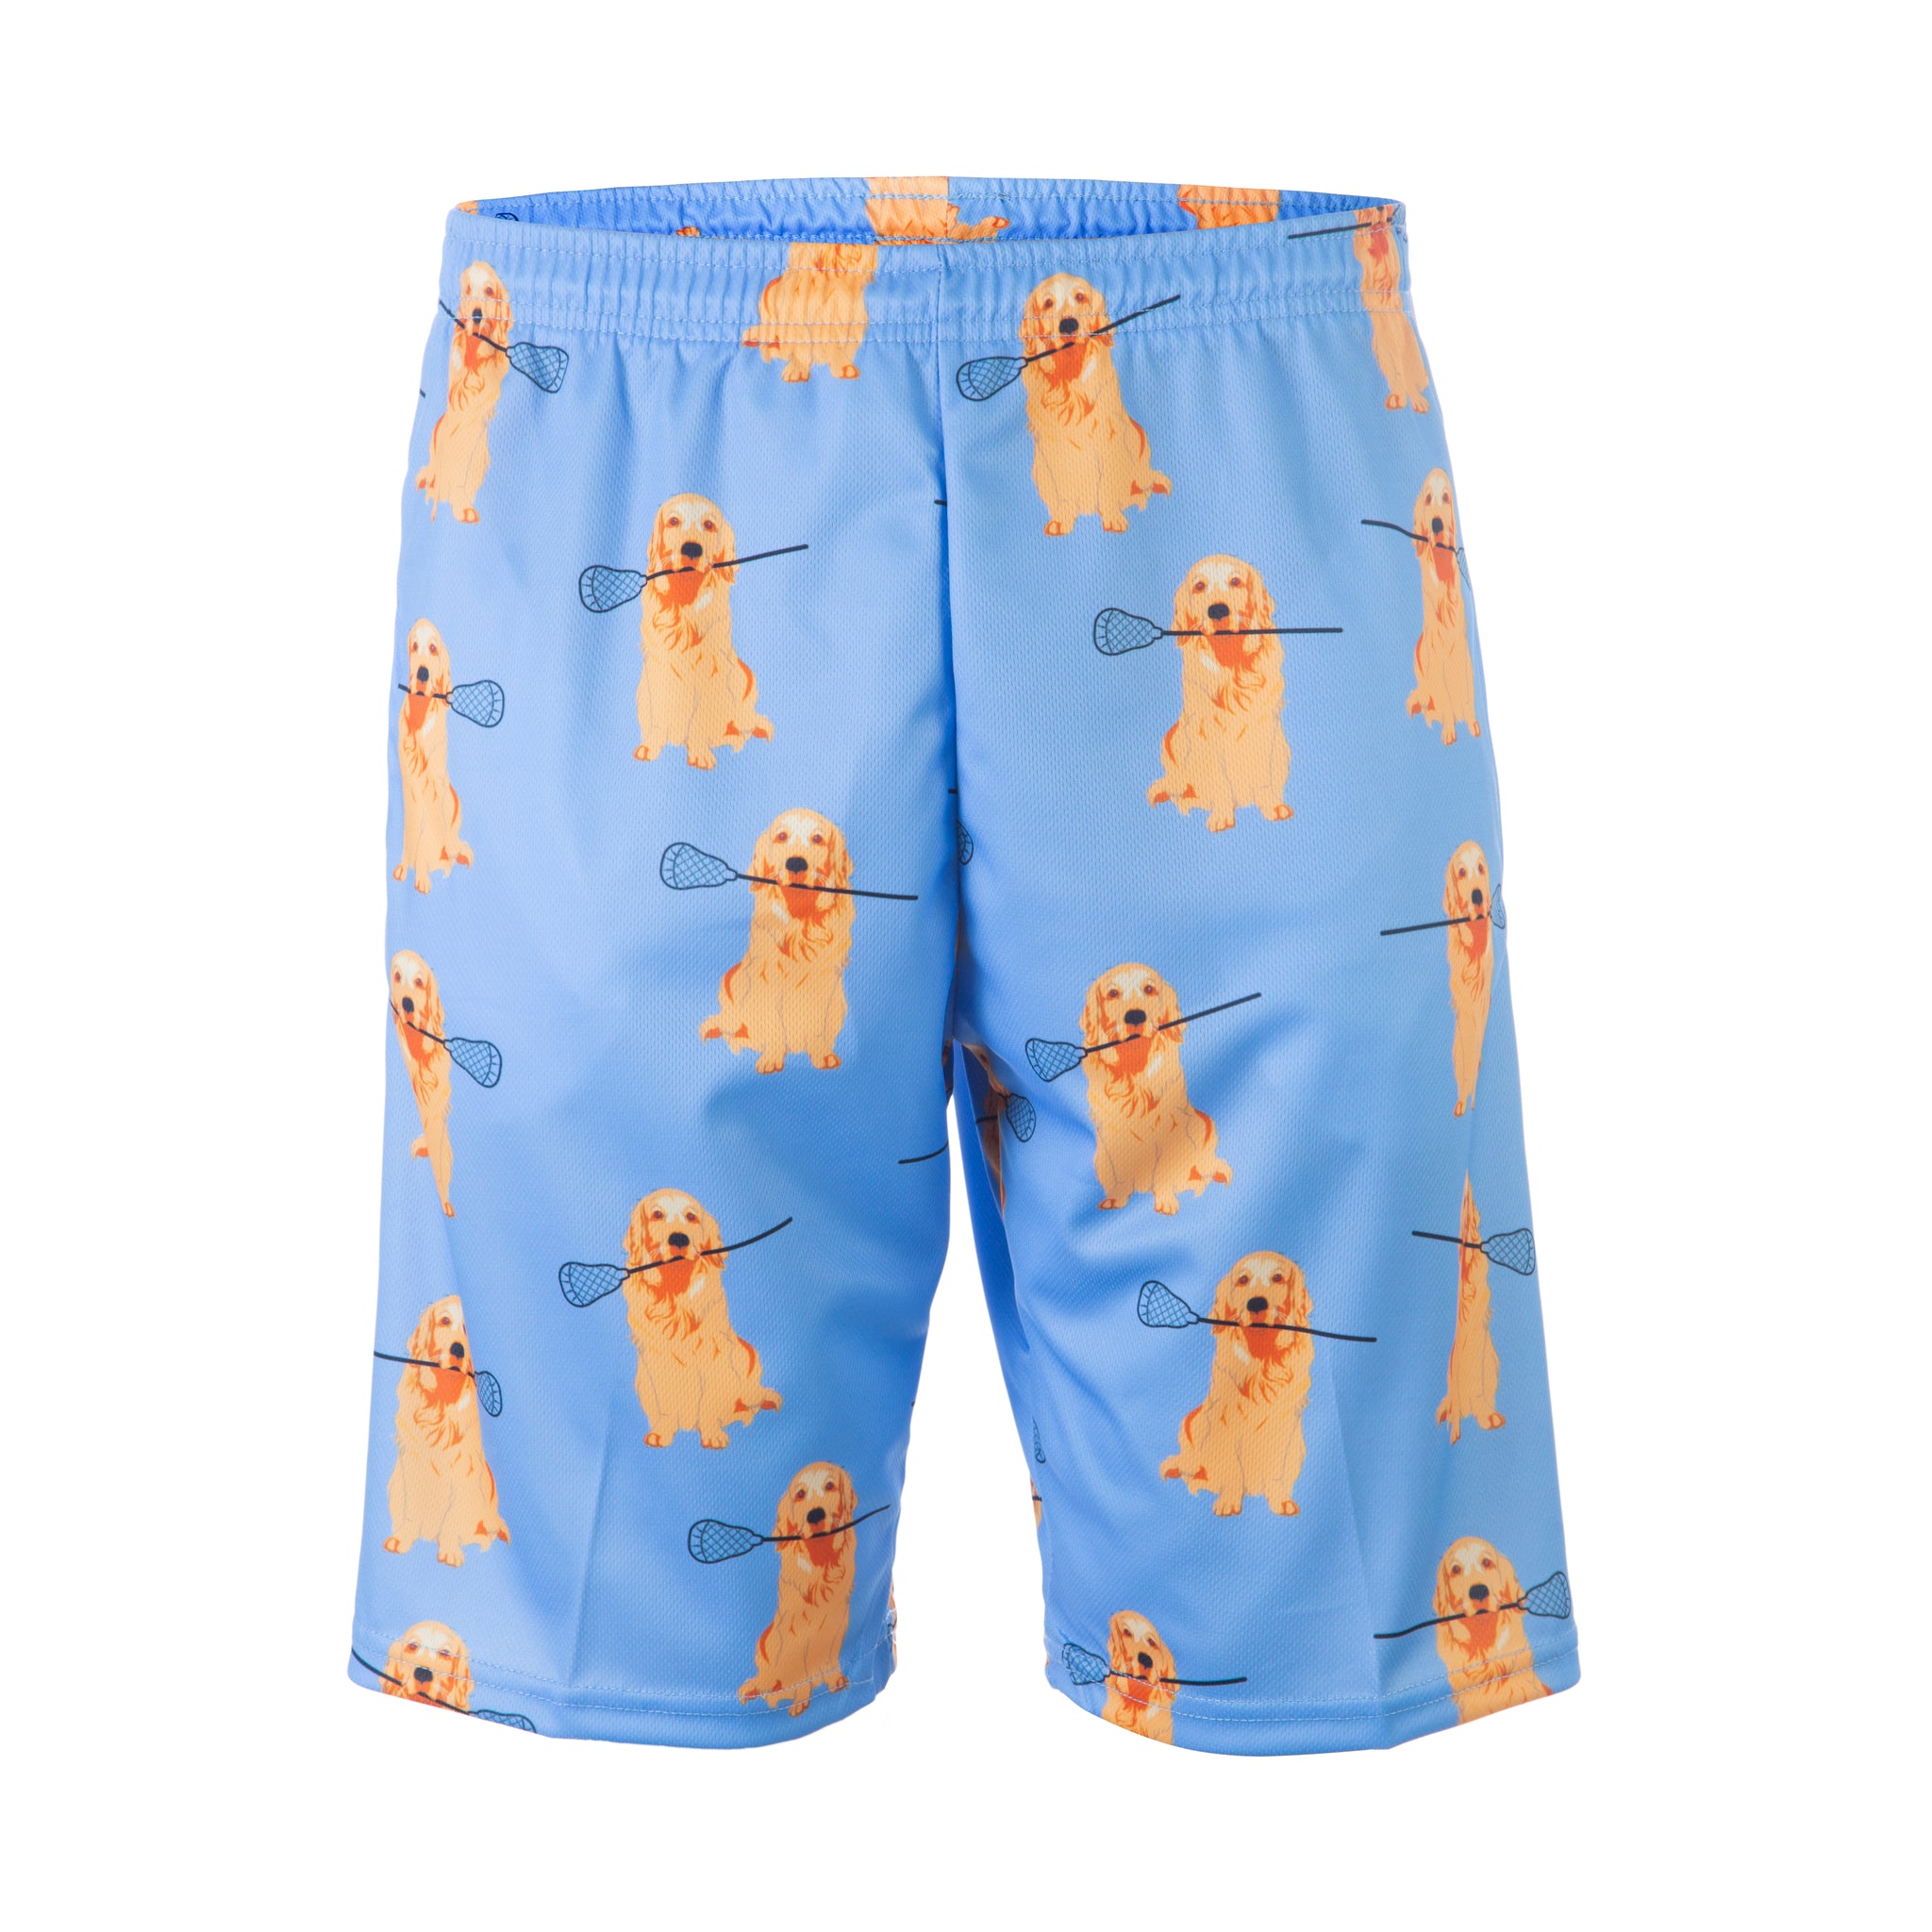 Lacrosse Shorts With Awesome Designs - Crosse Shorts